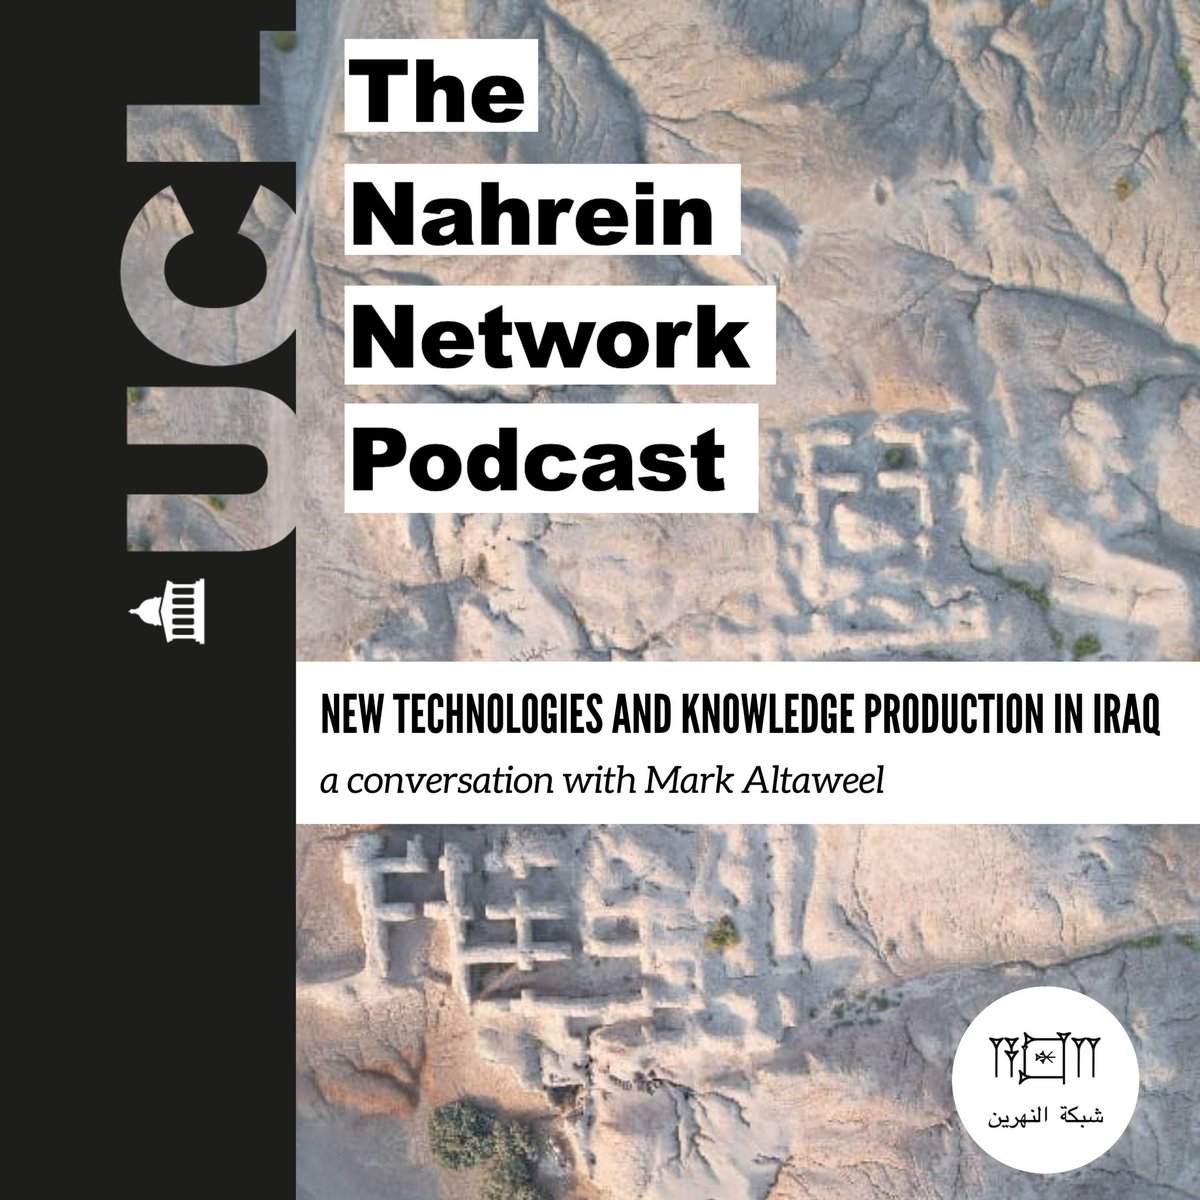 🎙️New Podcast on #uclminds Mehiyar Kathem talks to Professor @maltaweel5 (Near East Archaeology & Archaeological Data Science) of @UCL @UCLarchaeology about #Iraq and knowledge production. Listen here ⤵️ tinyurl.com/padr58at